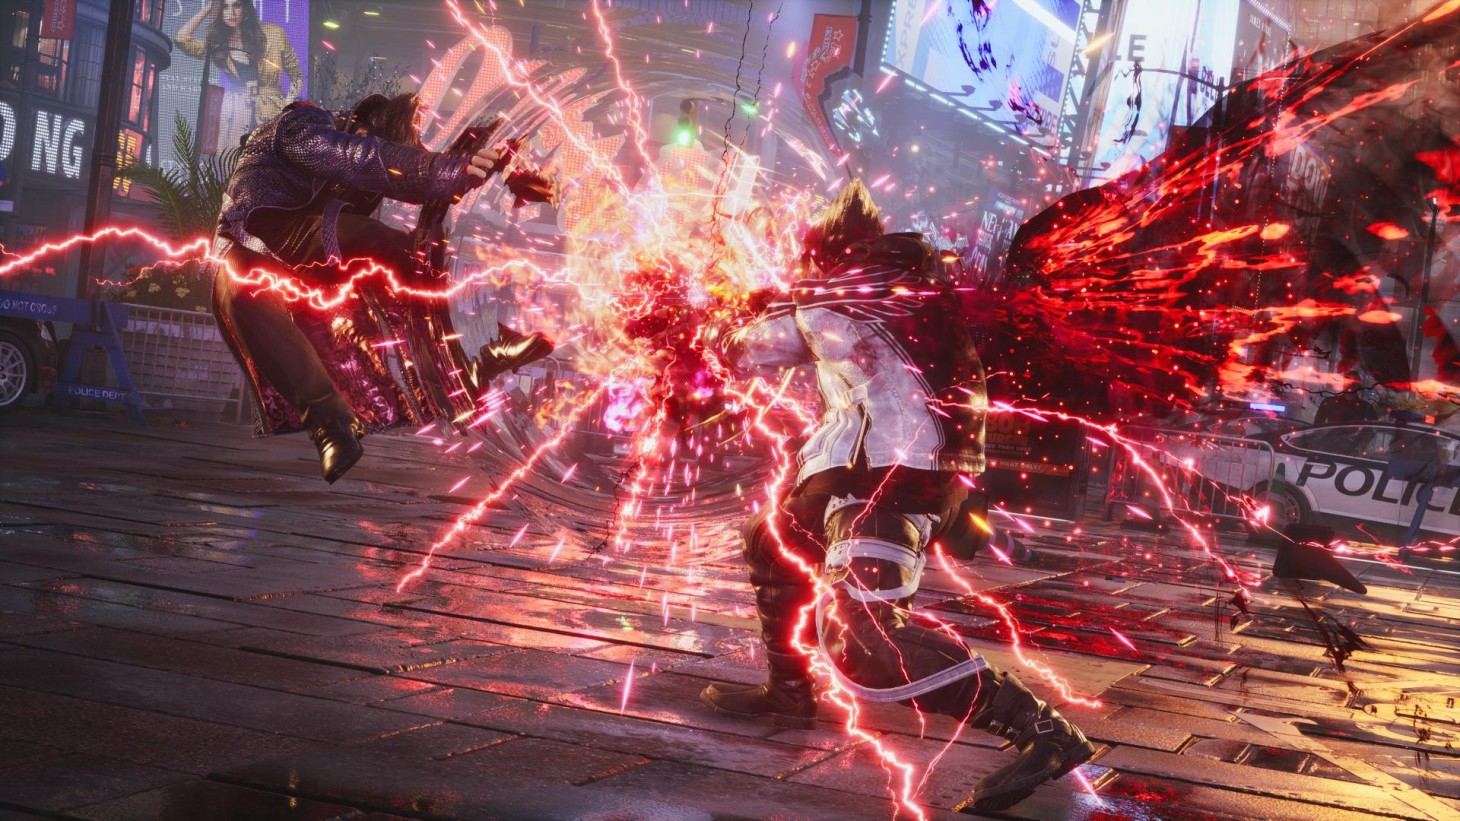 Tekken 8 demo is live now on PlayStation 5, here's everything it